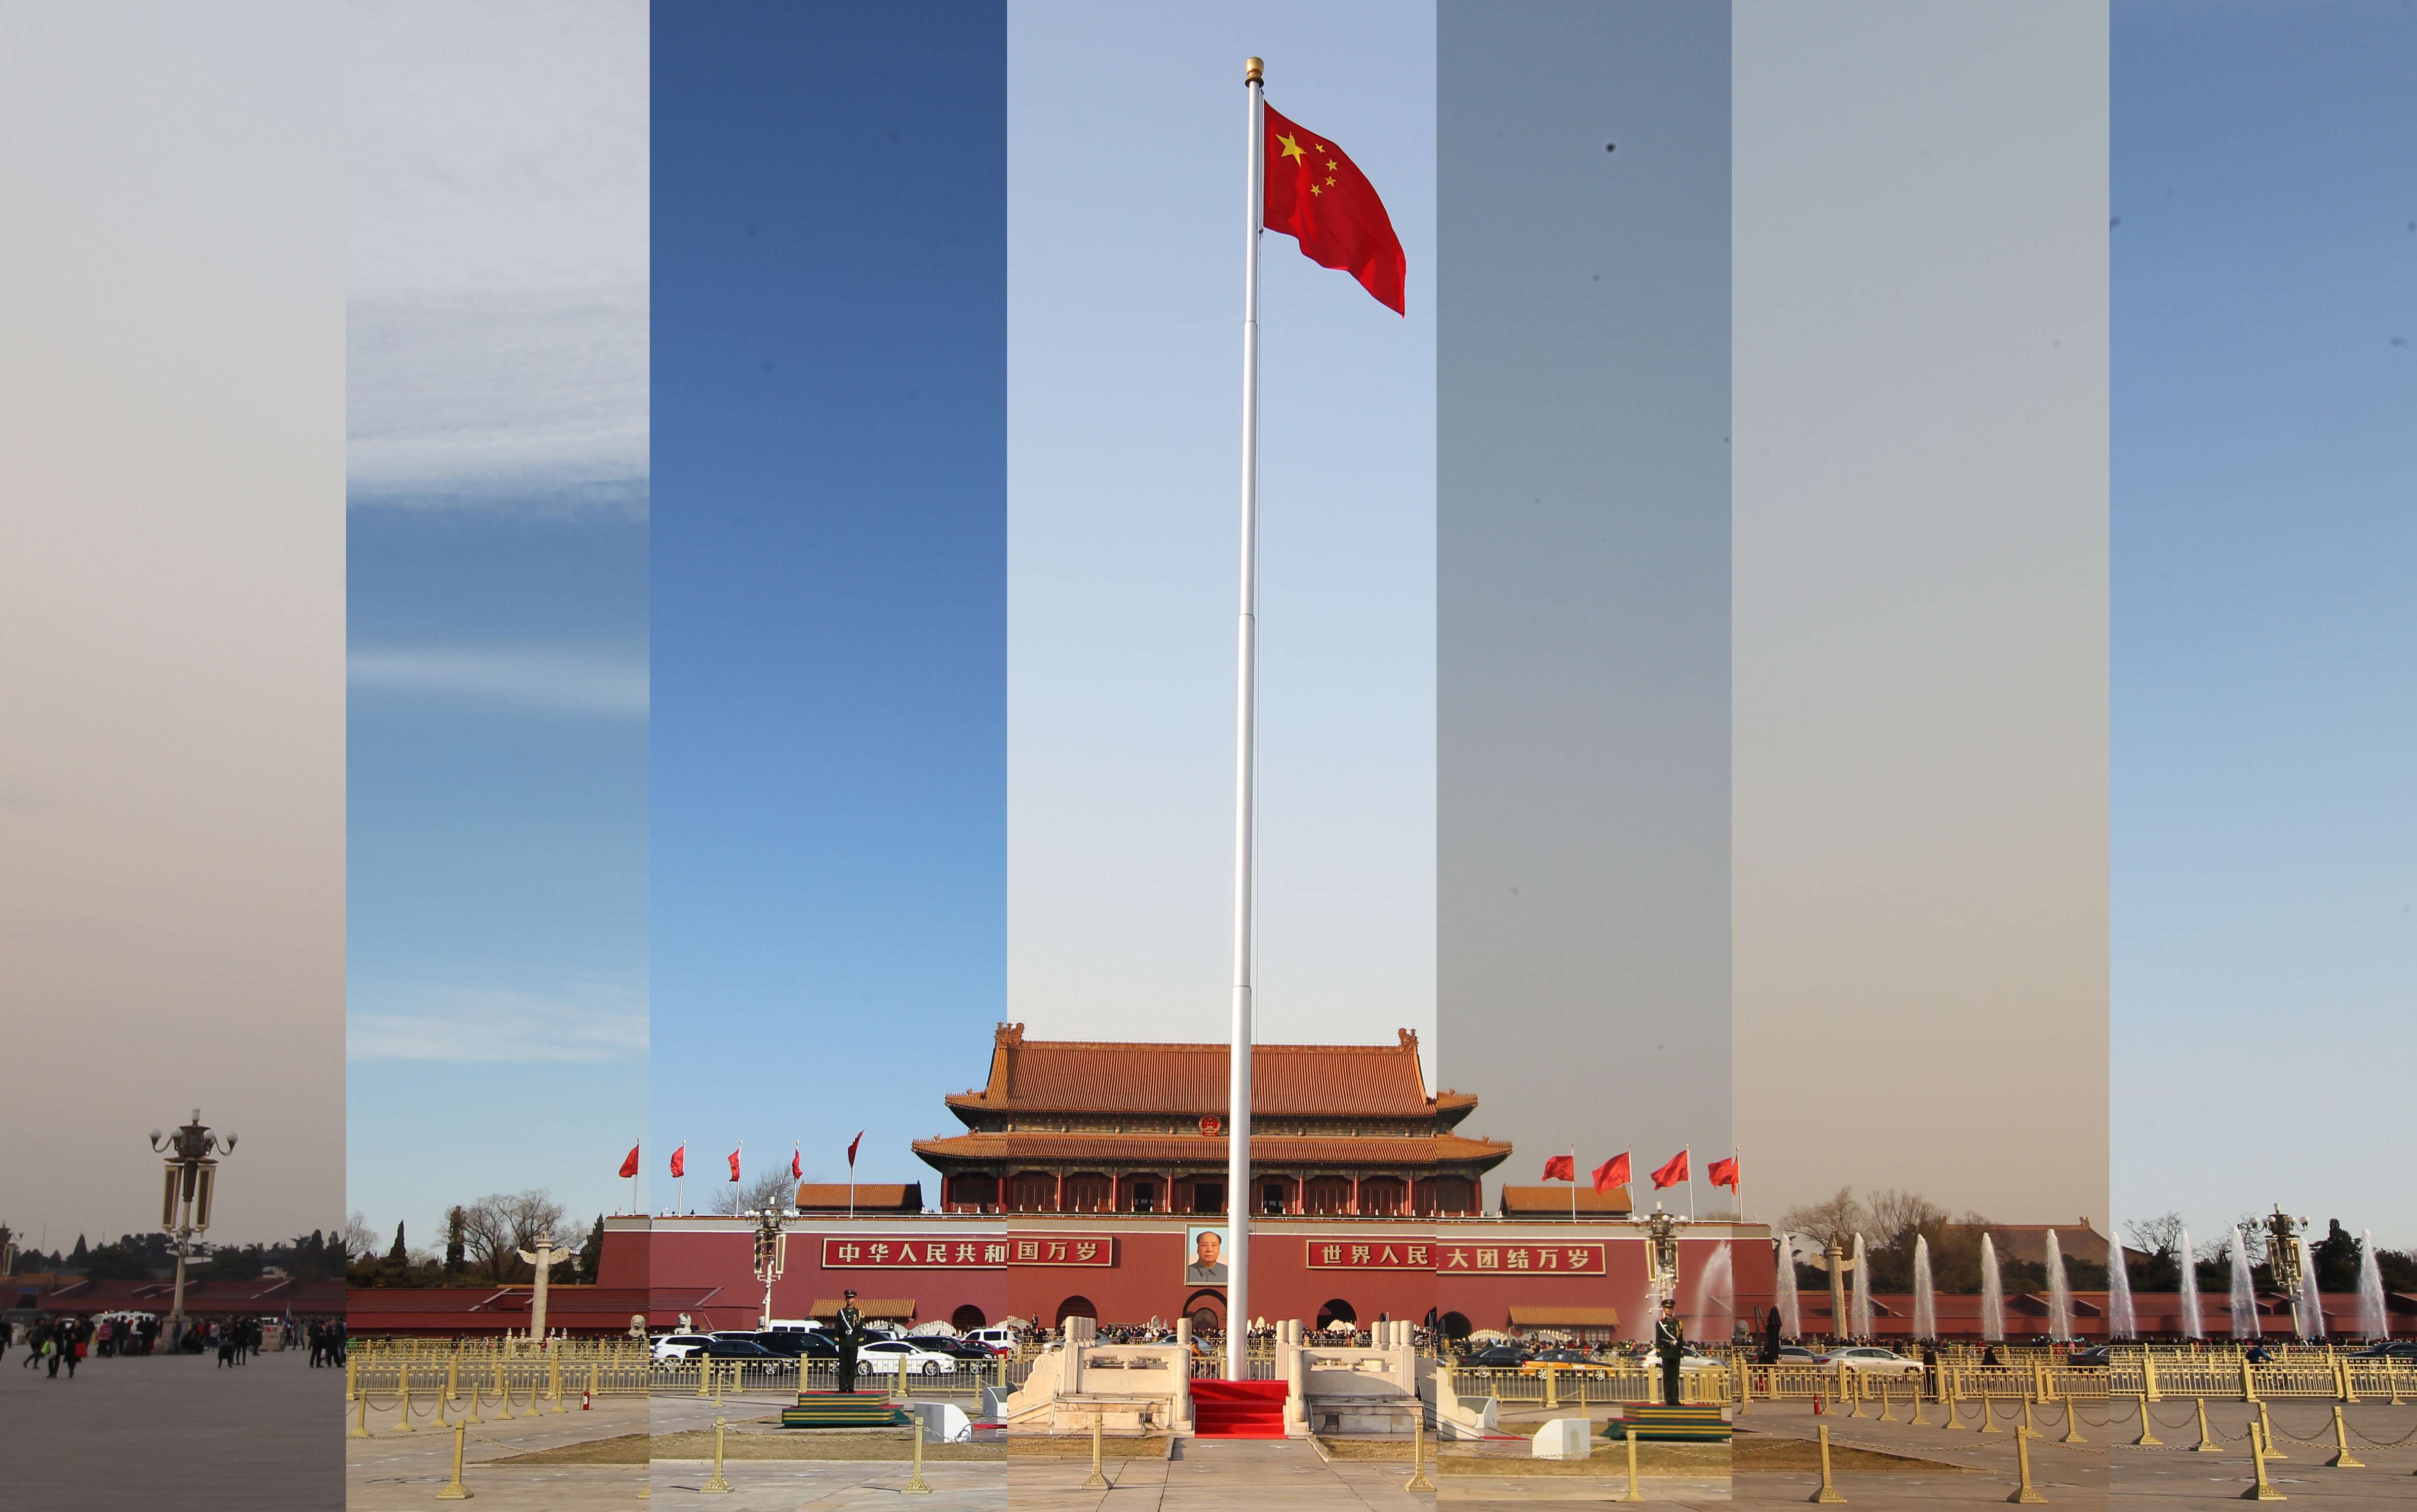 A combination photo shows the weather conditions respectively on (from left) Feb 27, Feb 28, Mar 01, Mar 02, Mar 03, Mar 04, and Mar 05, in Tiananmen Square in Beijing. Photo: Simon Song